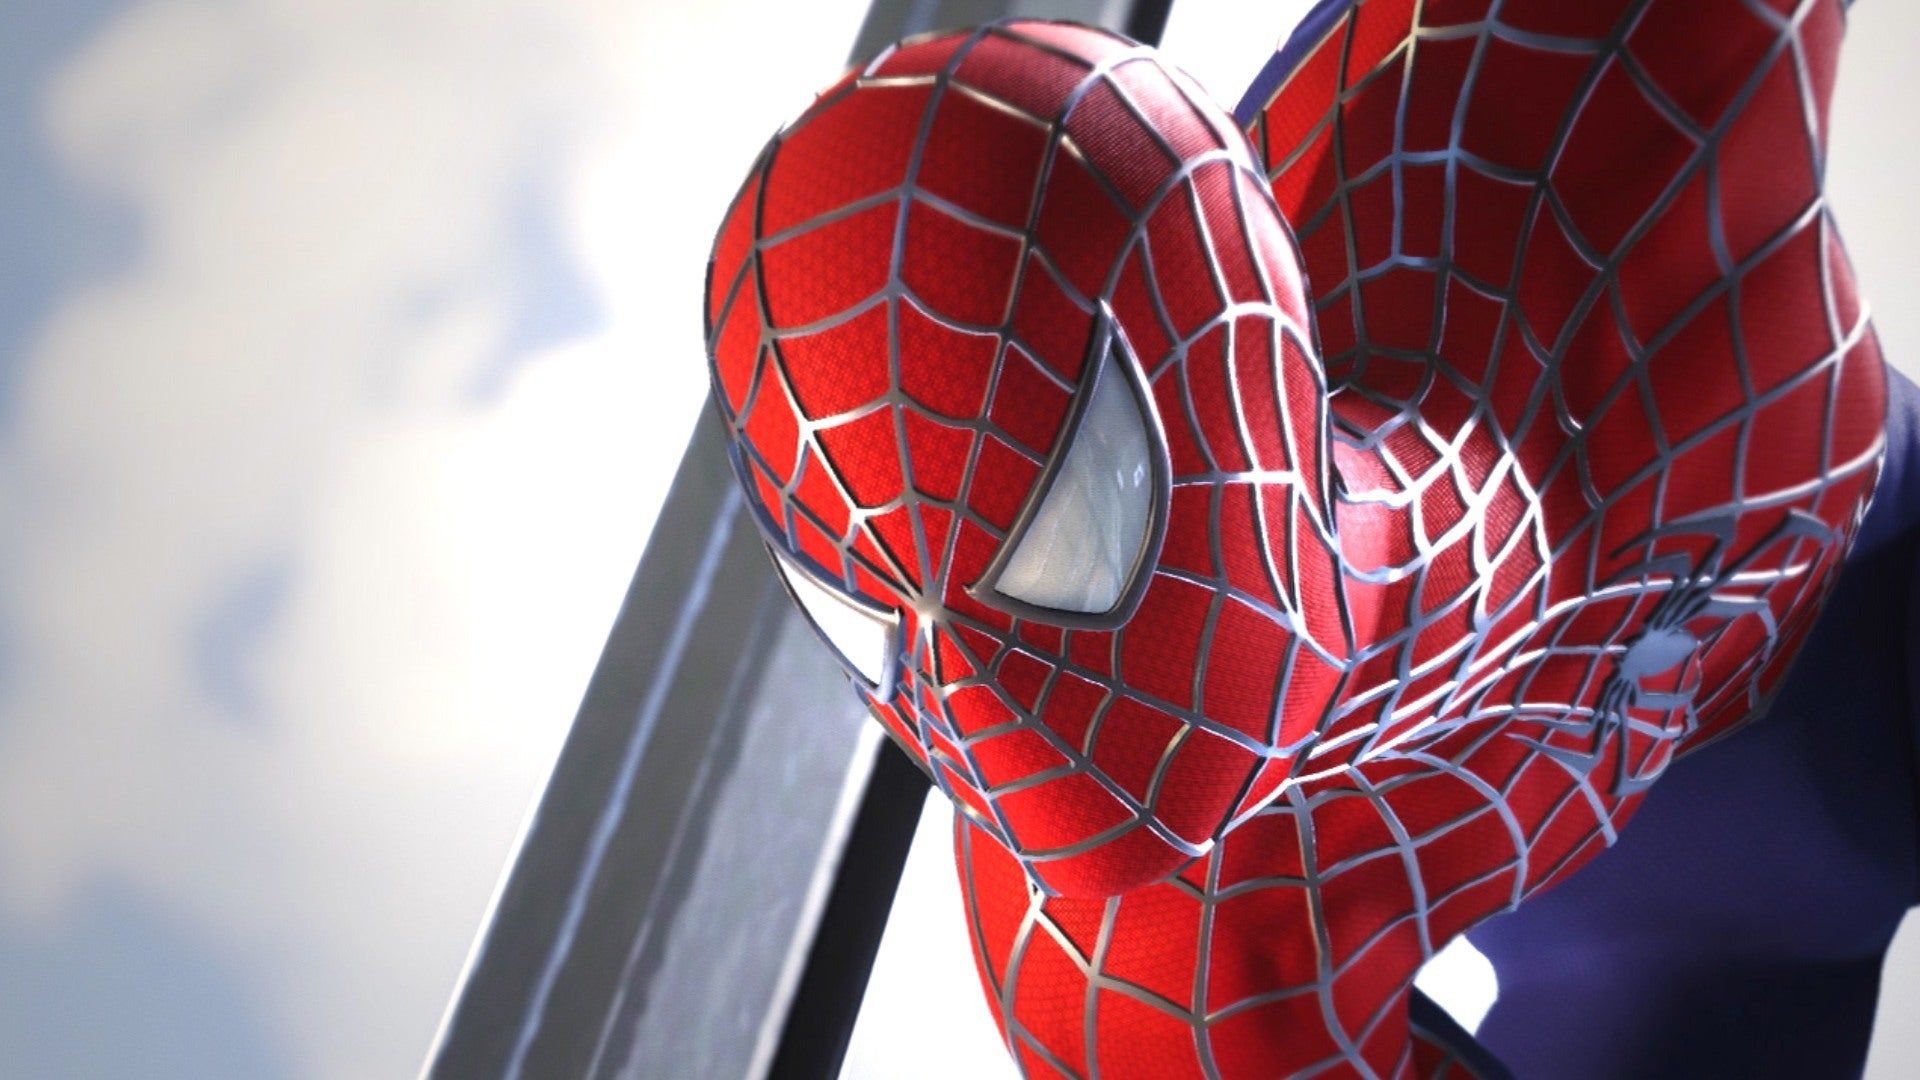 Spider Man PS4 Gets Highly Requested Sam Raimi Suit As Free DLC